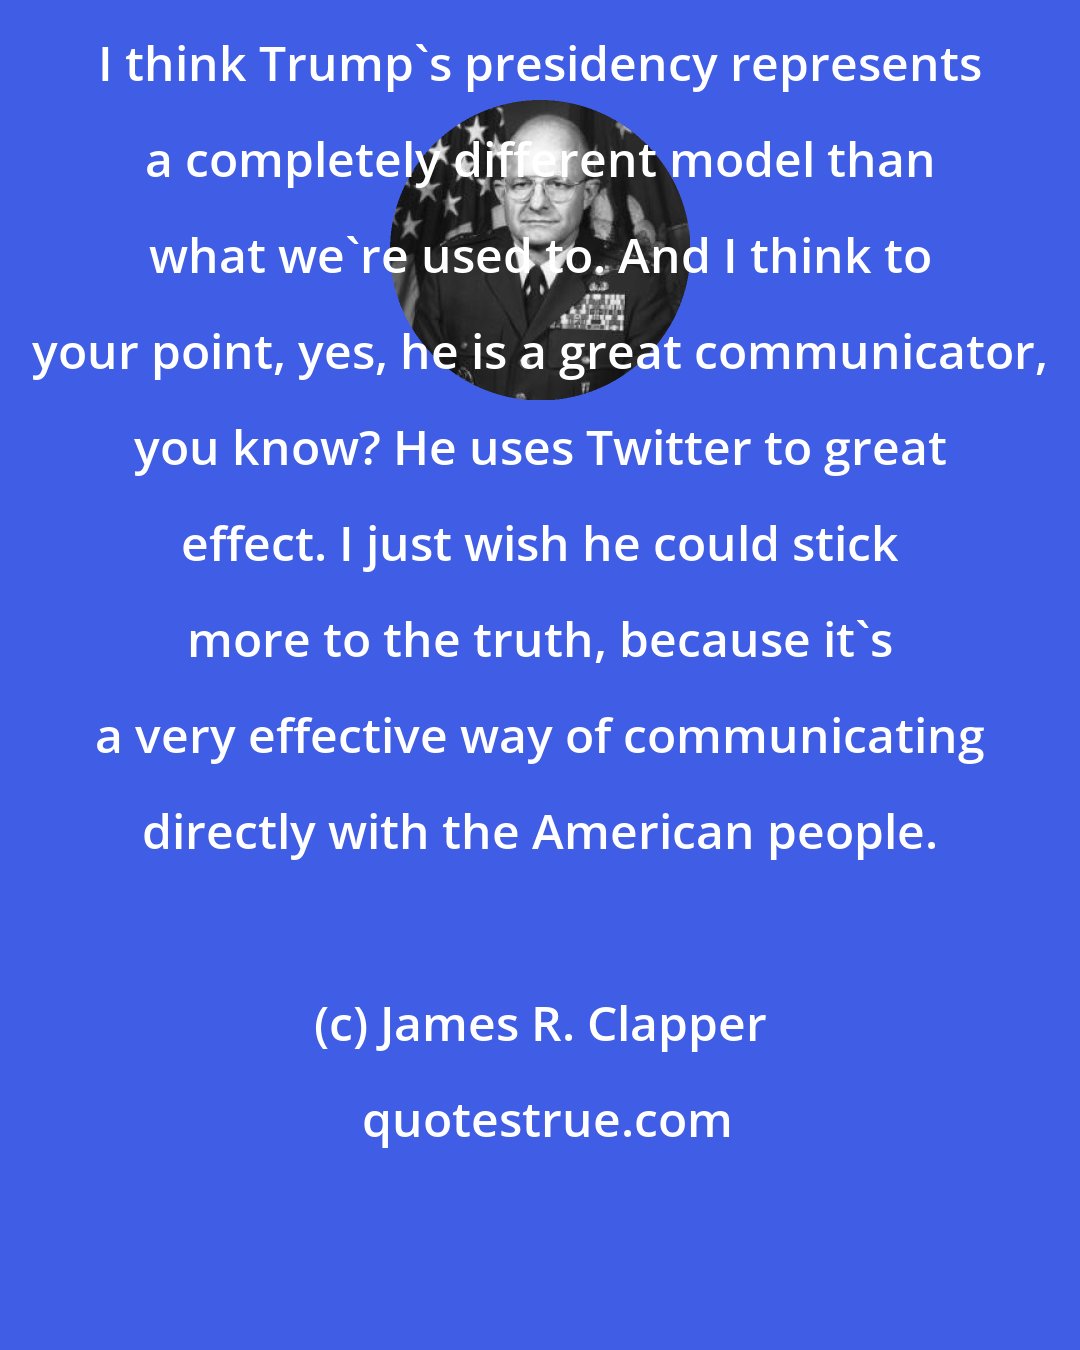 James R. Clapper: I think Trump's presidency represents a completely different model than what we're used to. And I think to your point, yes, he is a great communicator, you know? He uses Twitter to great effect. I just wish he could stick more to the truth, because it's a very effective way of communicating directly with the American people.